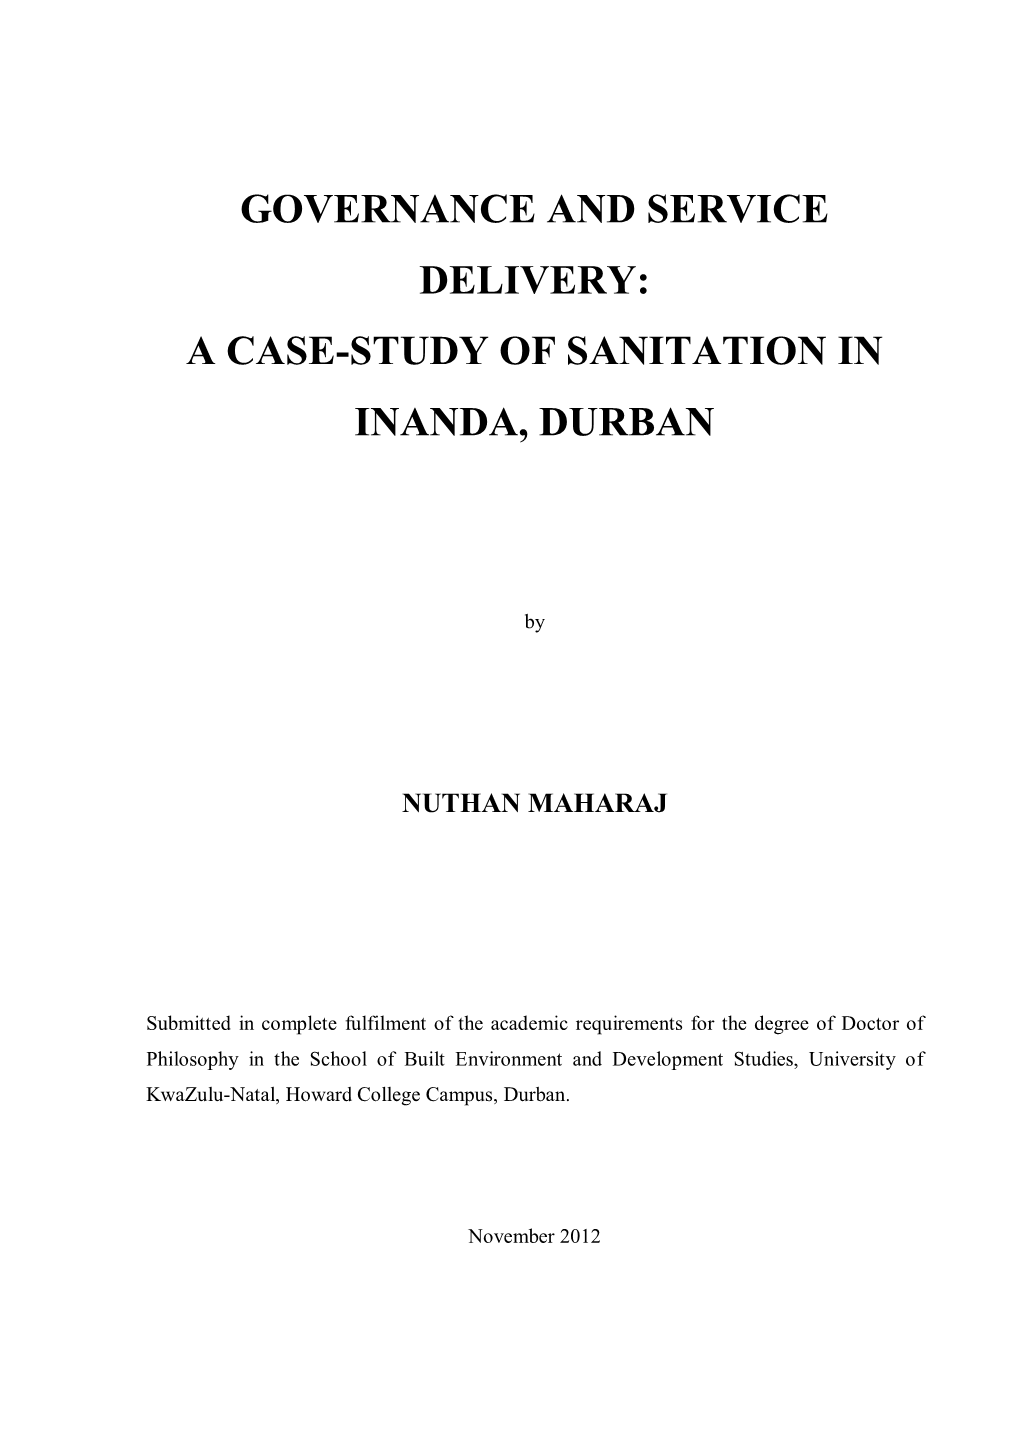 Governance and Service Delivery: a Case-Study of Sanitation in Inanda, Durban